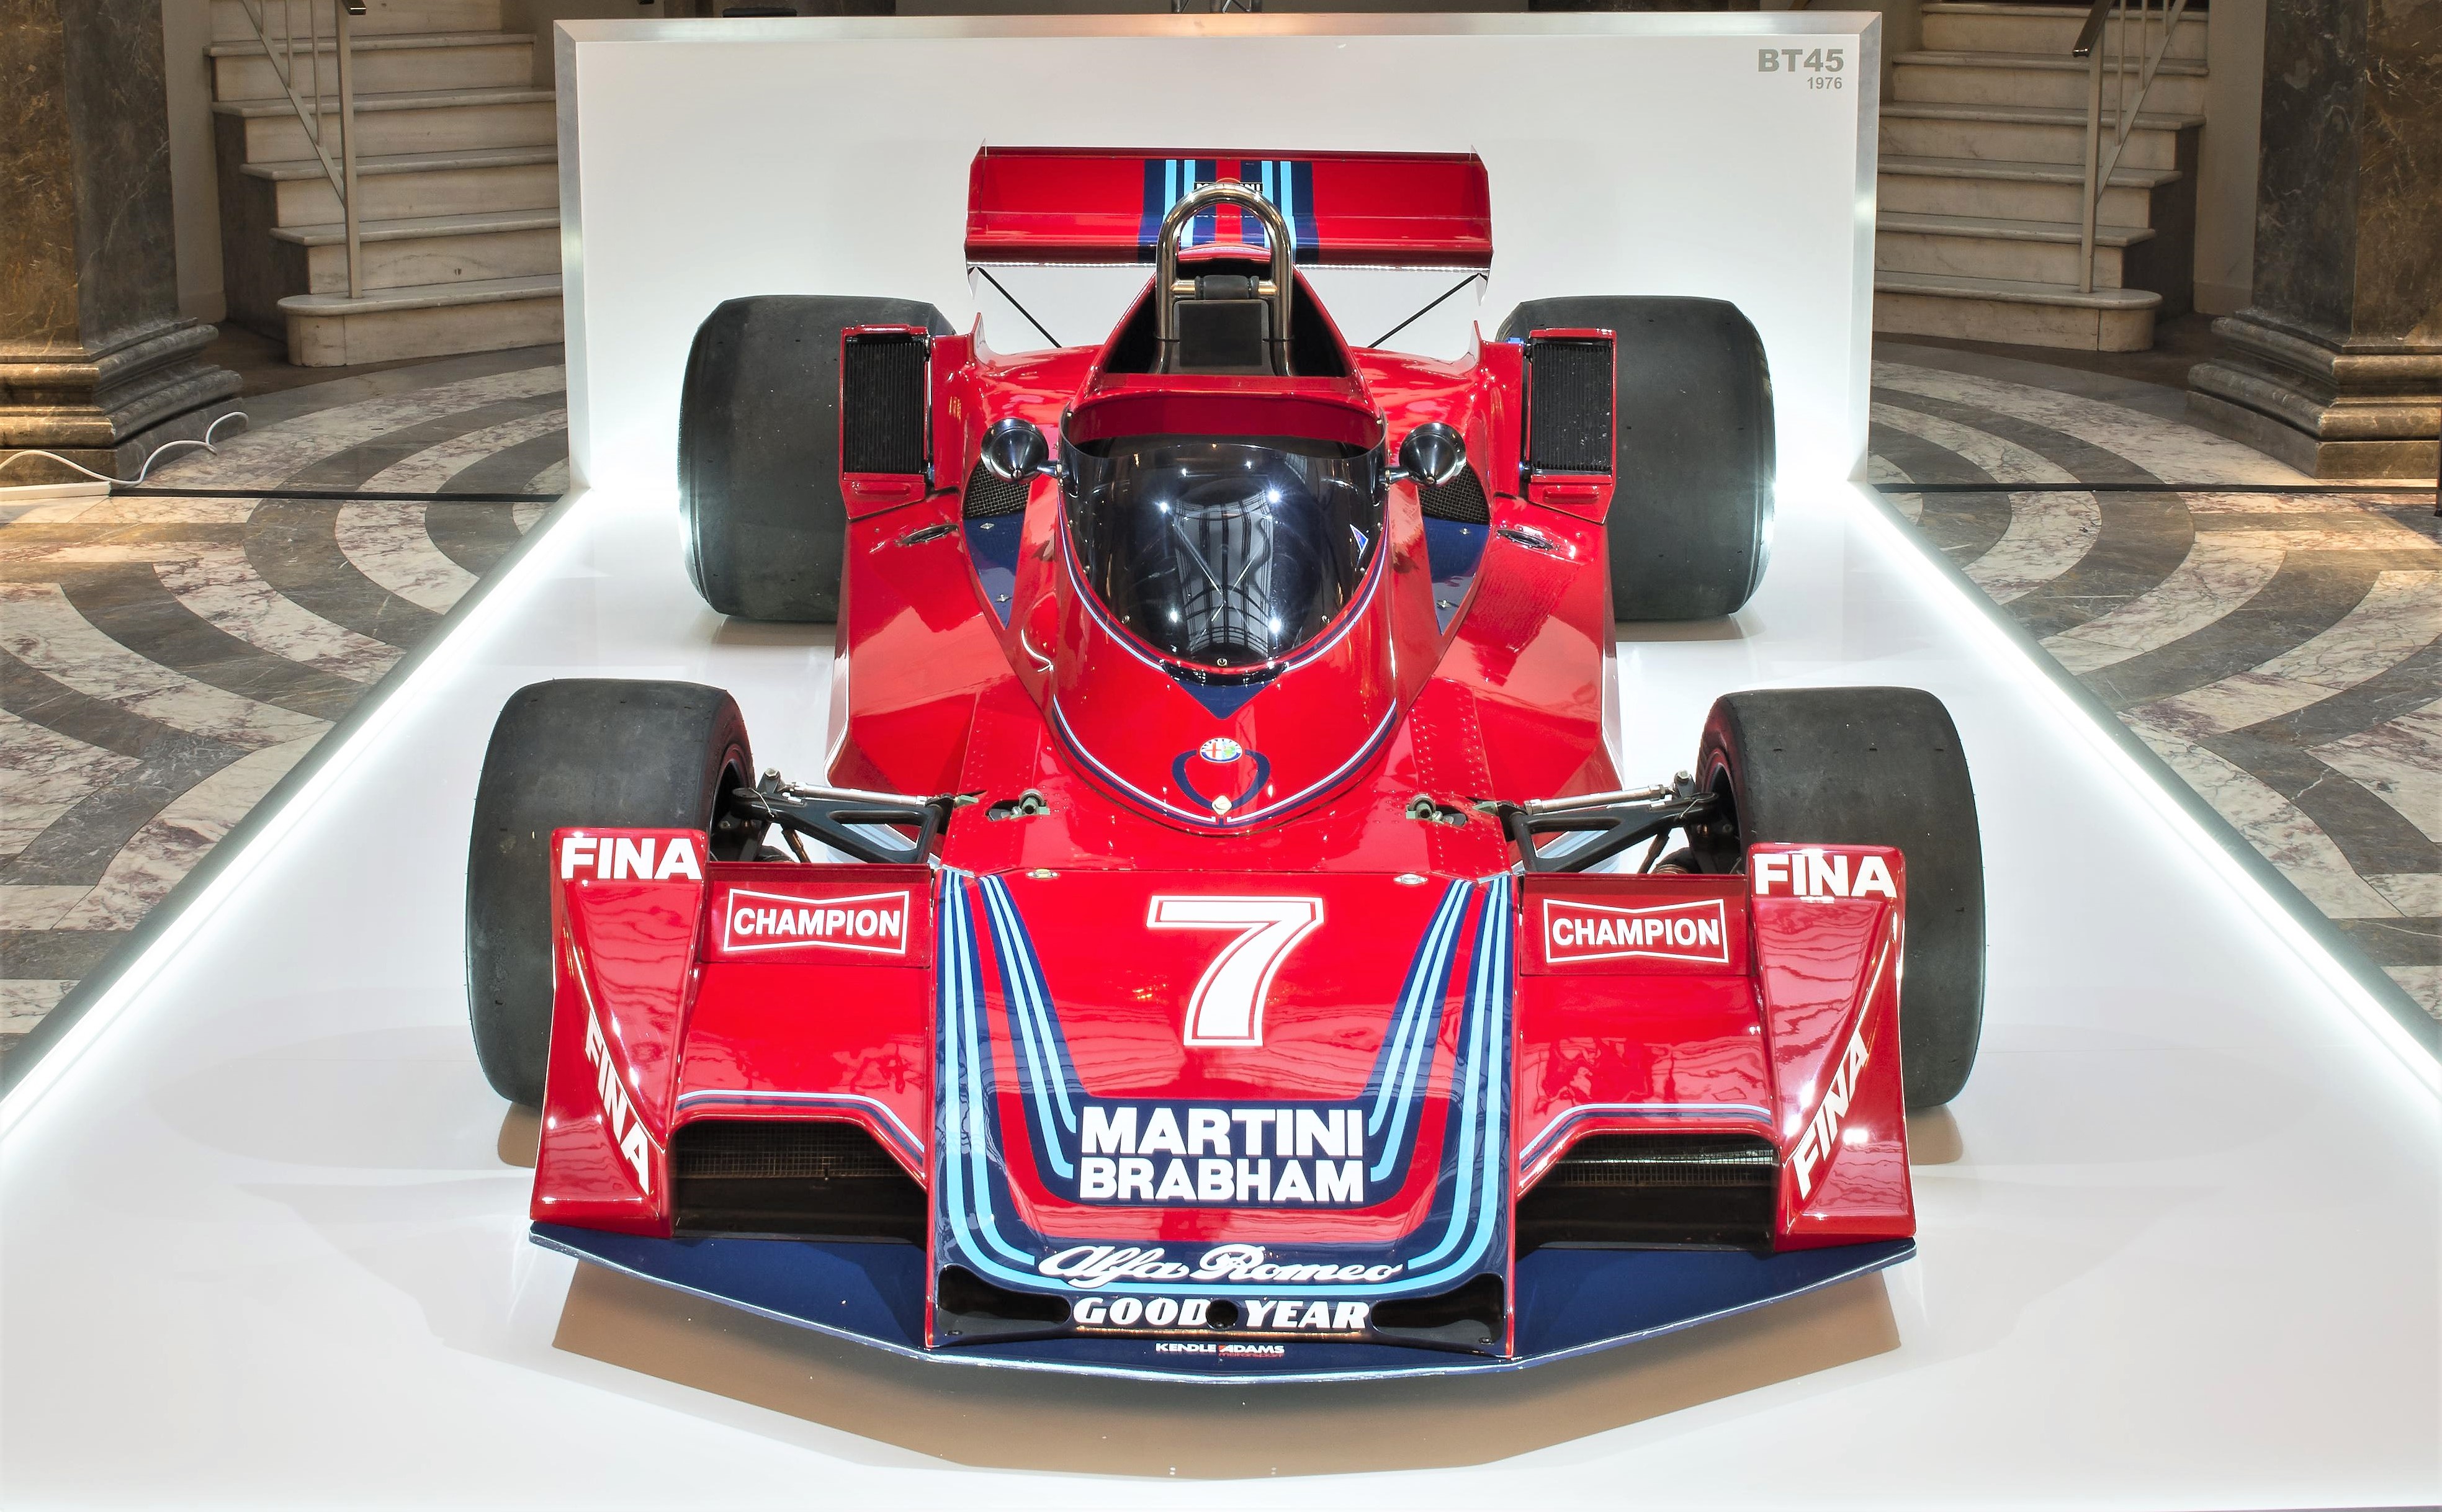 The 1976 Martini Brabham BT45 was one of the historic grand prix cars on display 